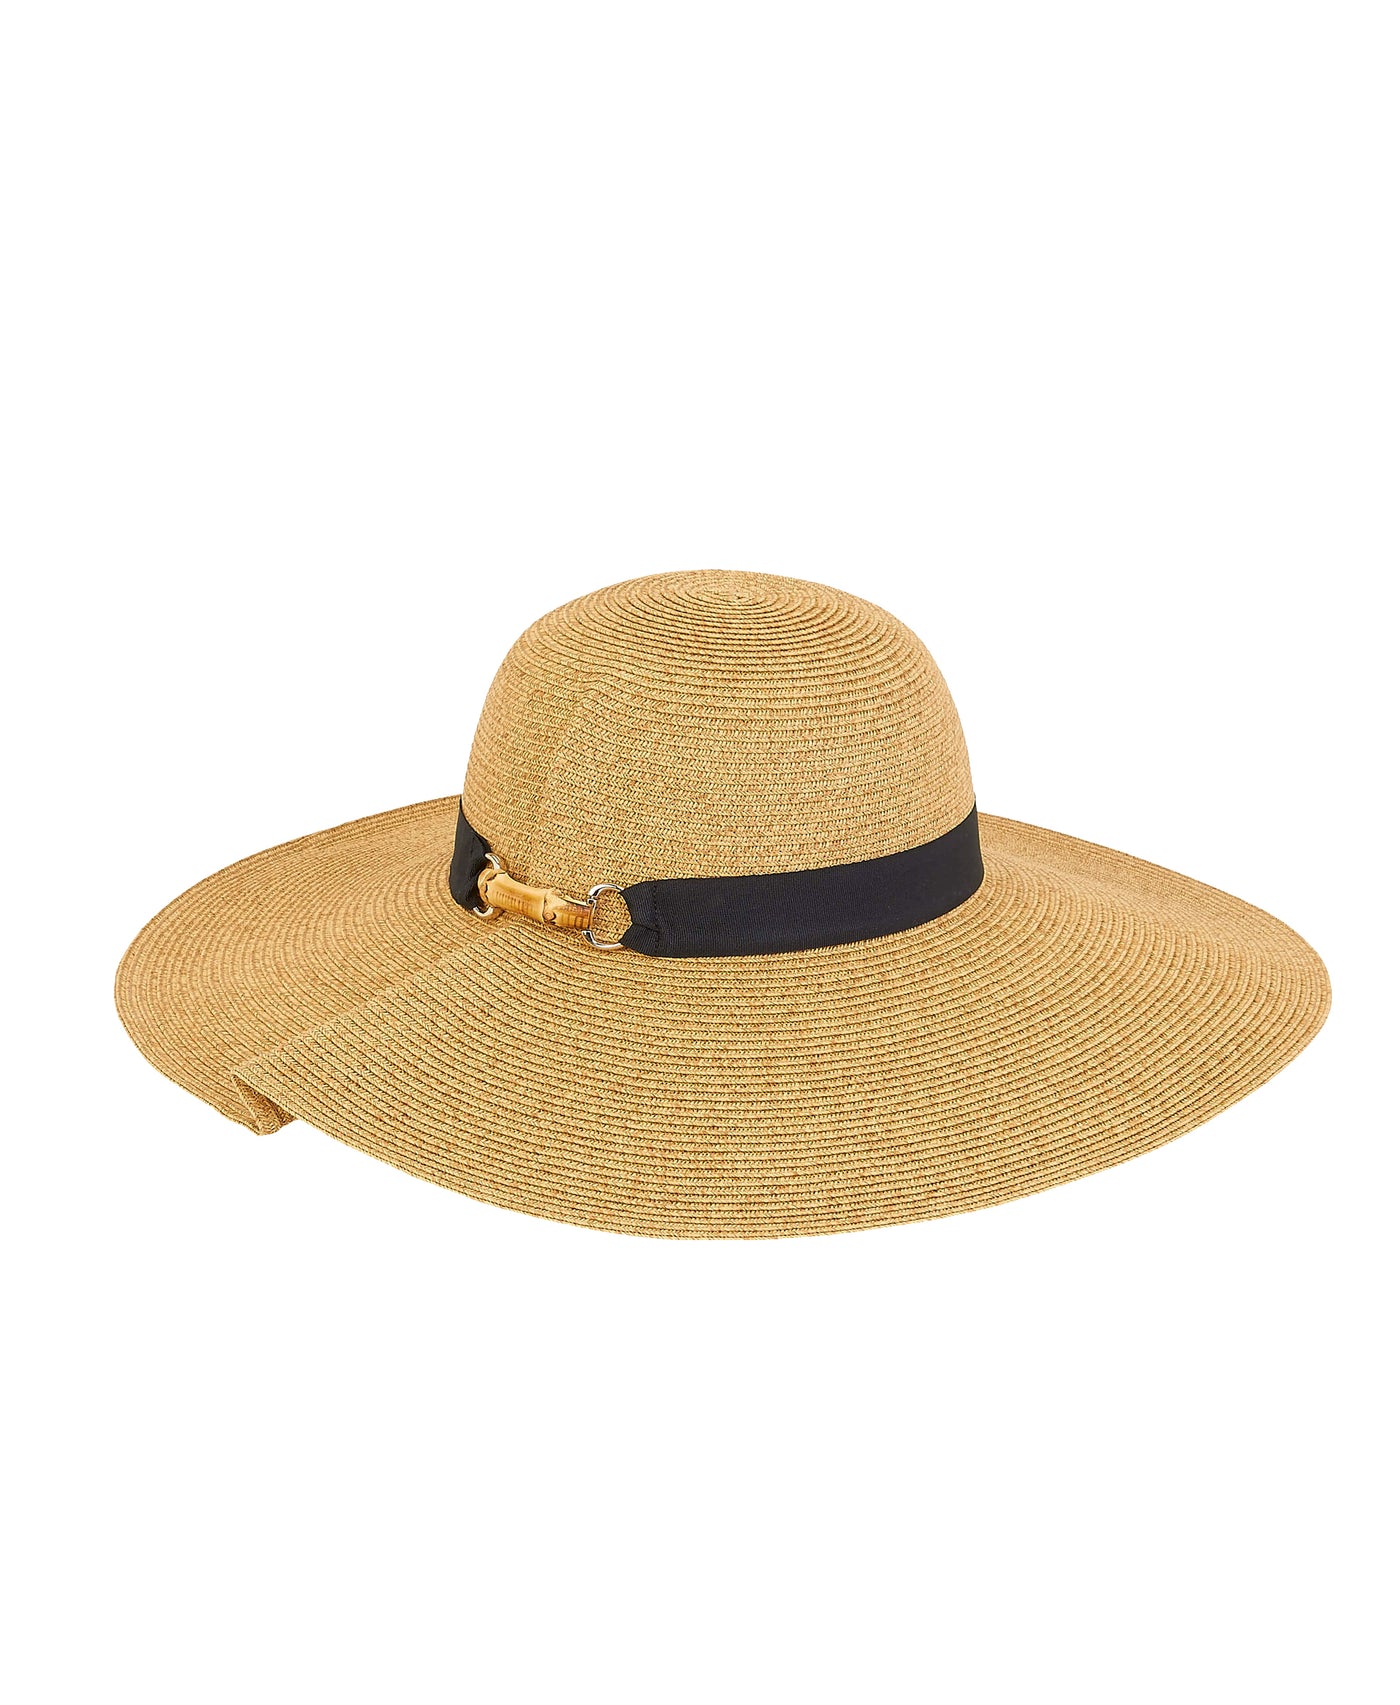 Straw Hat w/ Bamboo Accent image 1